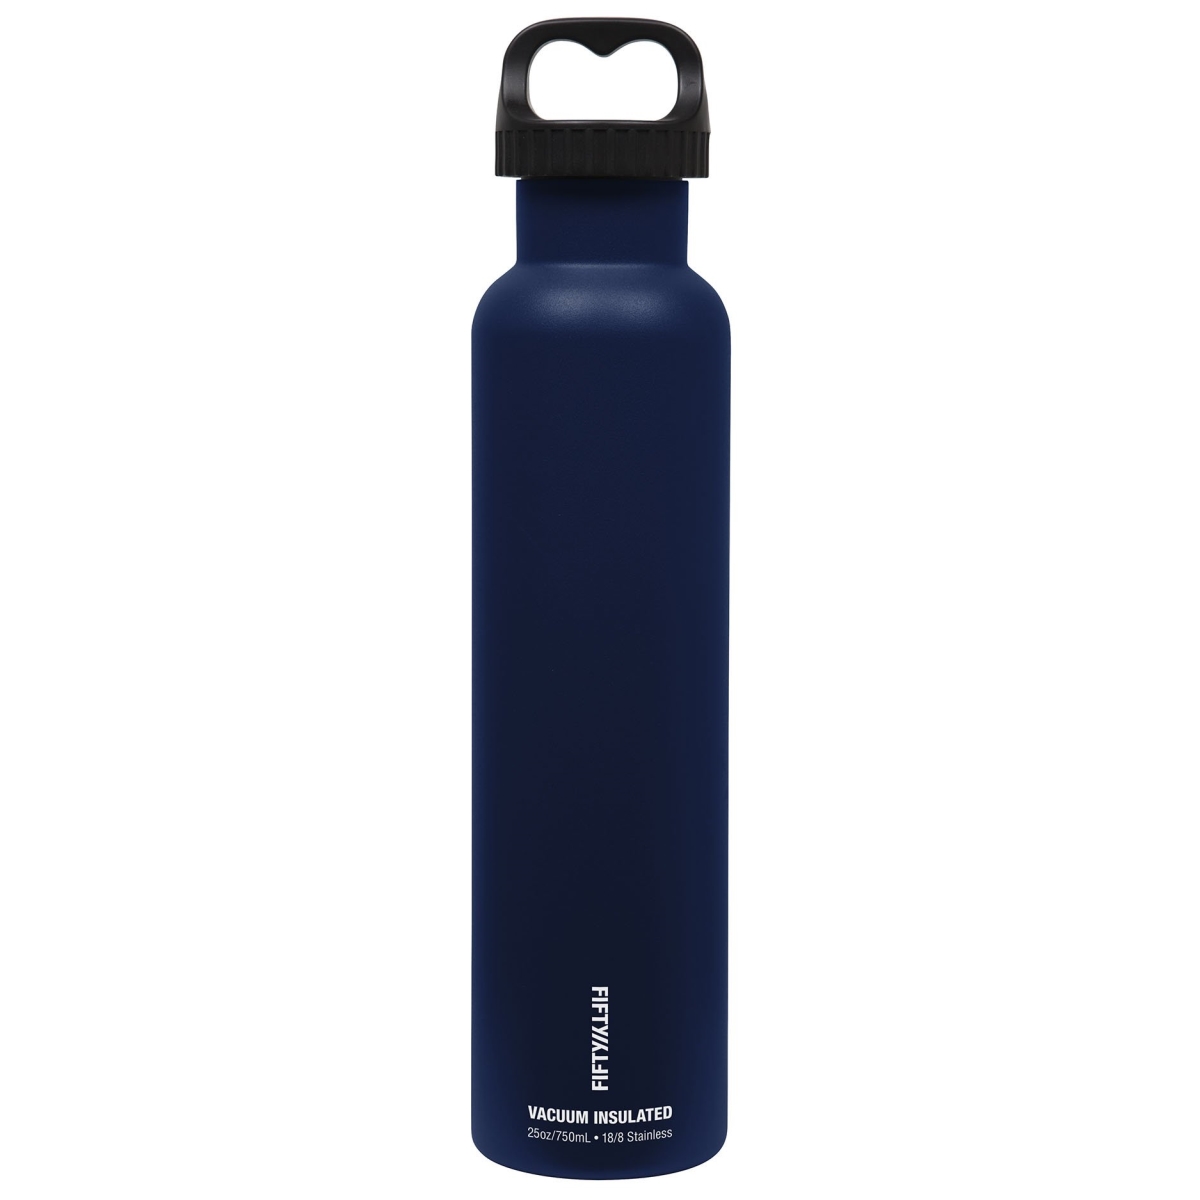 V25003nb0 25 Oz Double-wall Vacuum-insulated Bottles With 2 Finger Grip Cap, Navy Blue